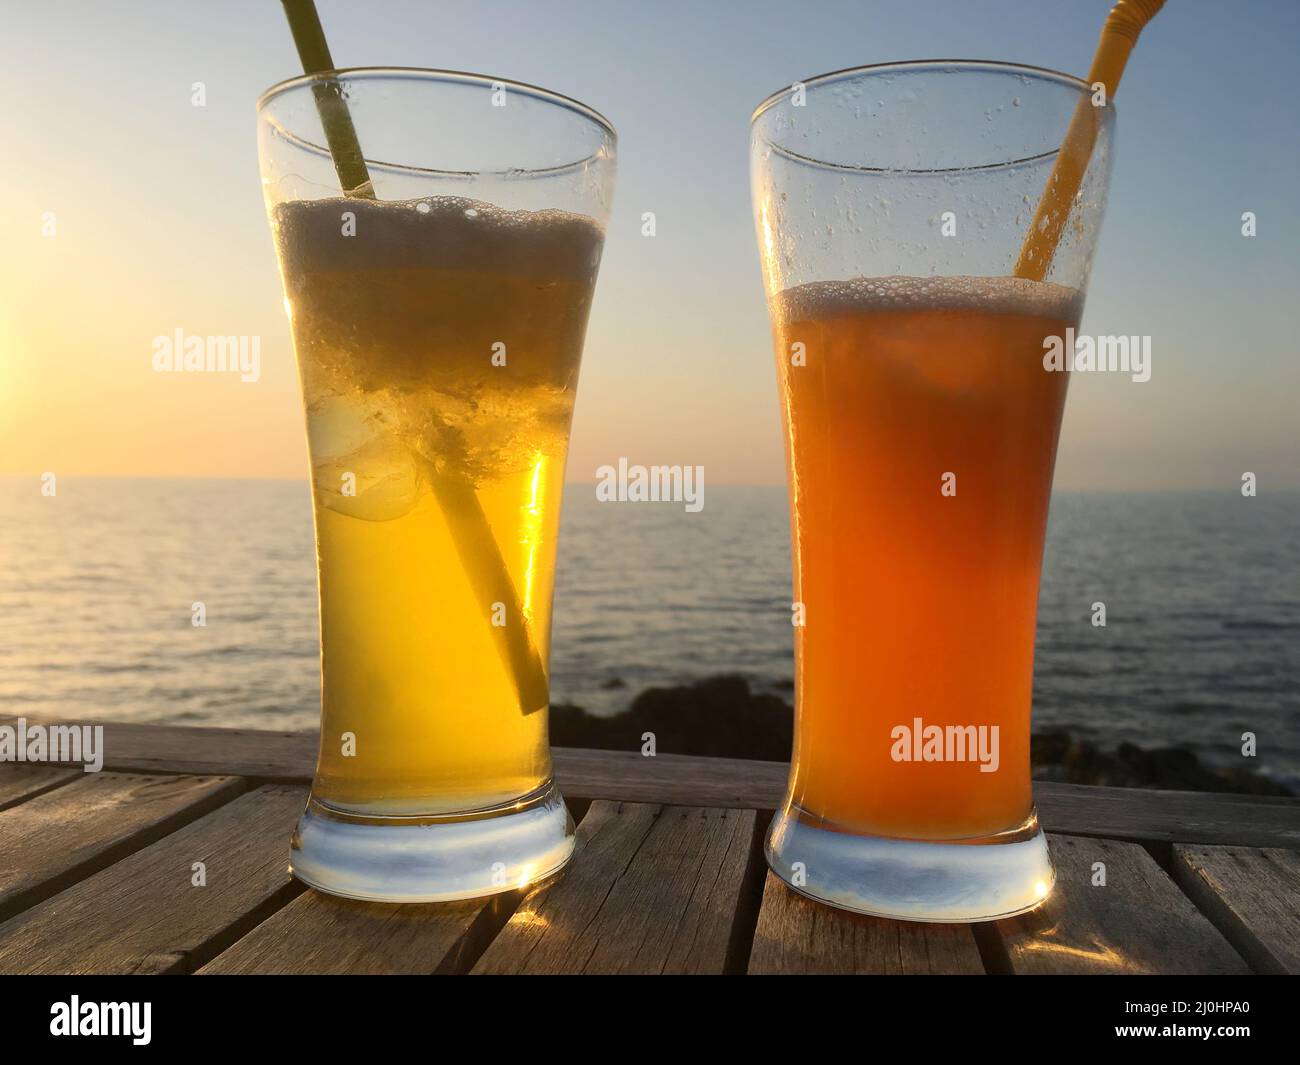 Frozen cocktail glasses over sunset Stock Photo